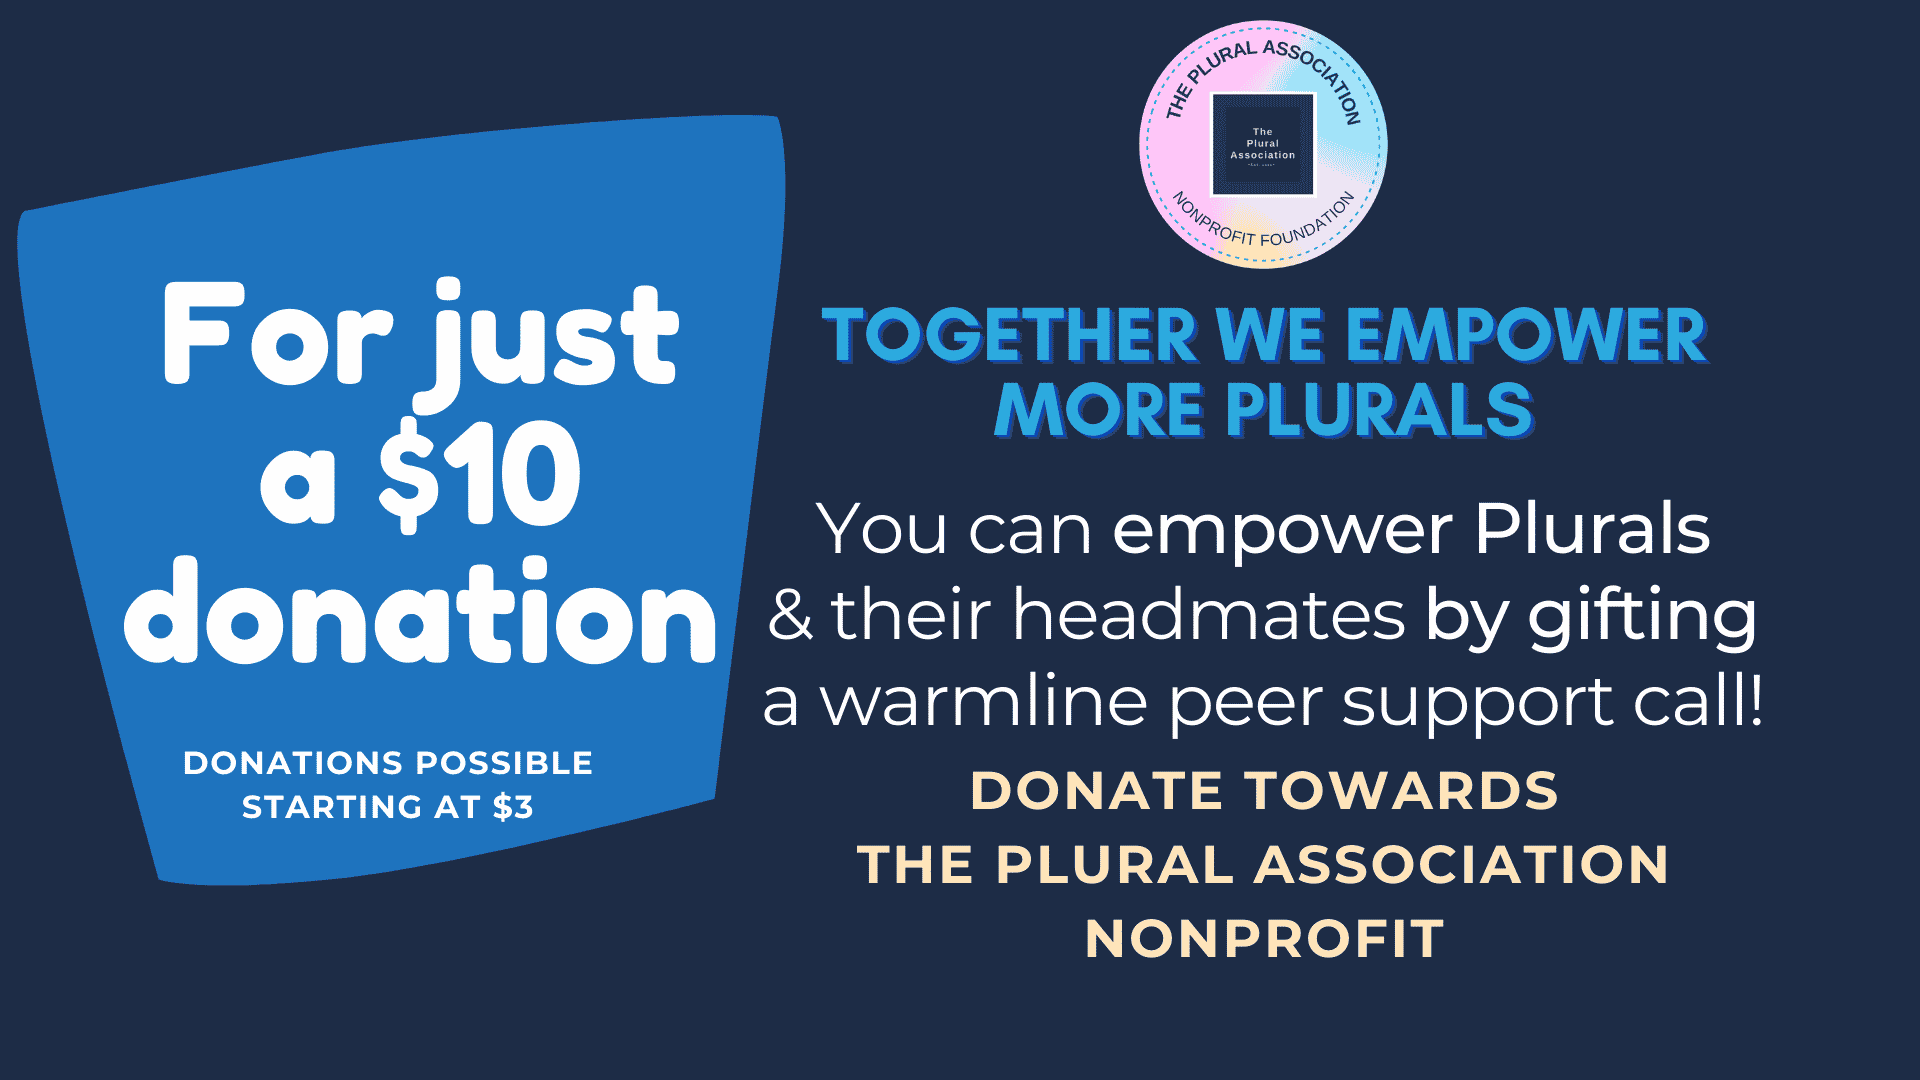 Image: For just a $10 donation! Together we empower more Plurals! You can empower Plurals and their Headmates by gifting a warmline peer support call! Donate towards the plural association nonprofit